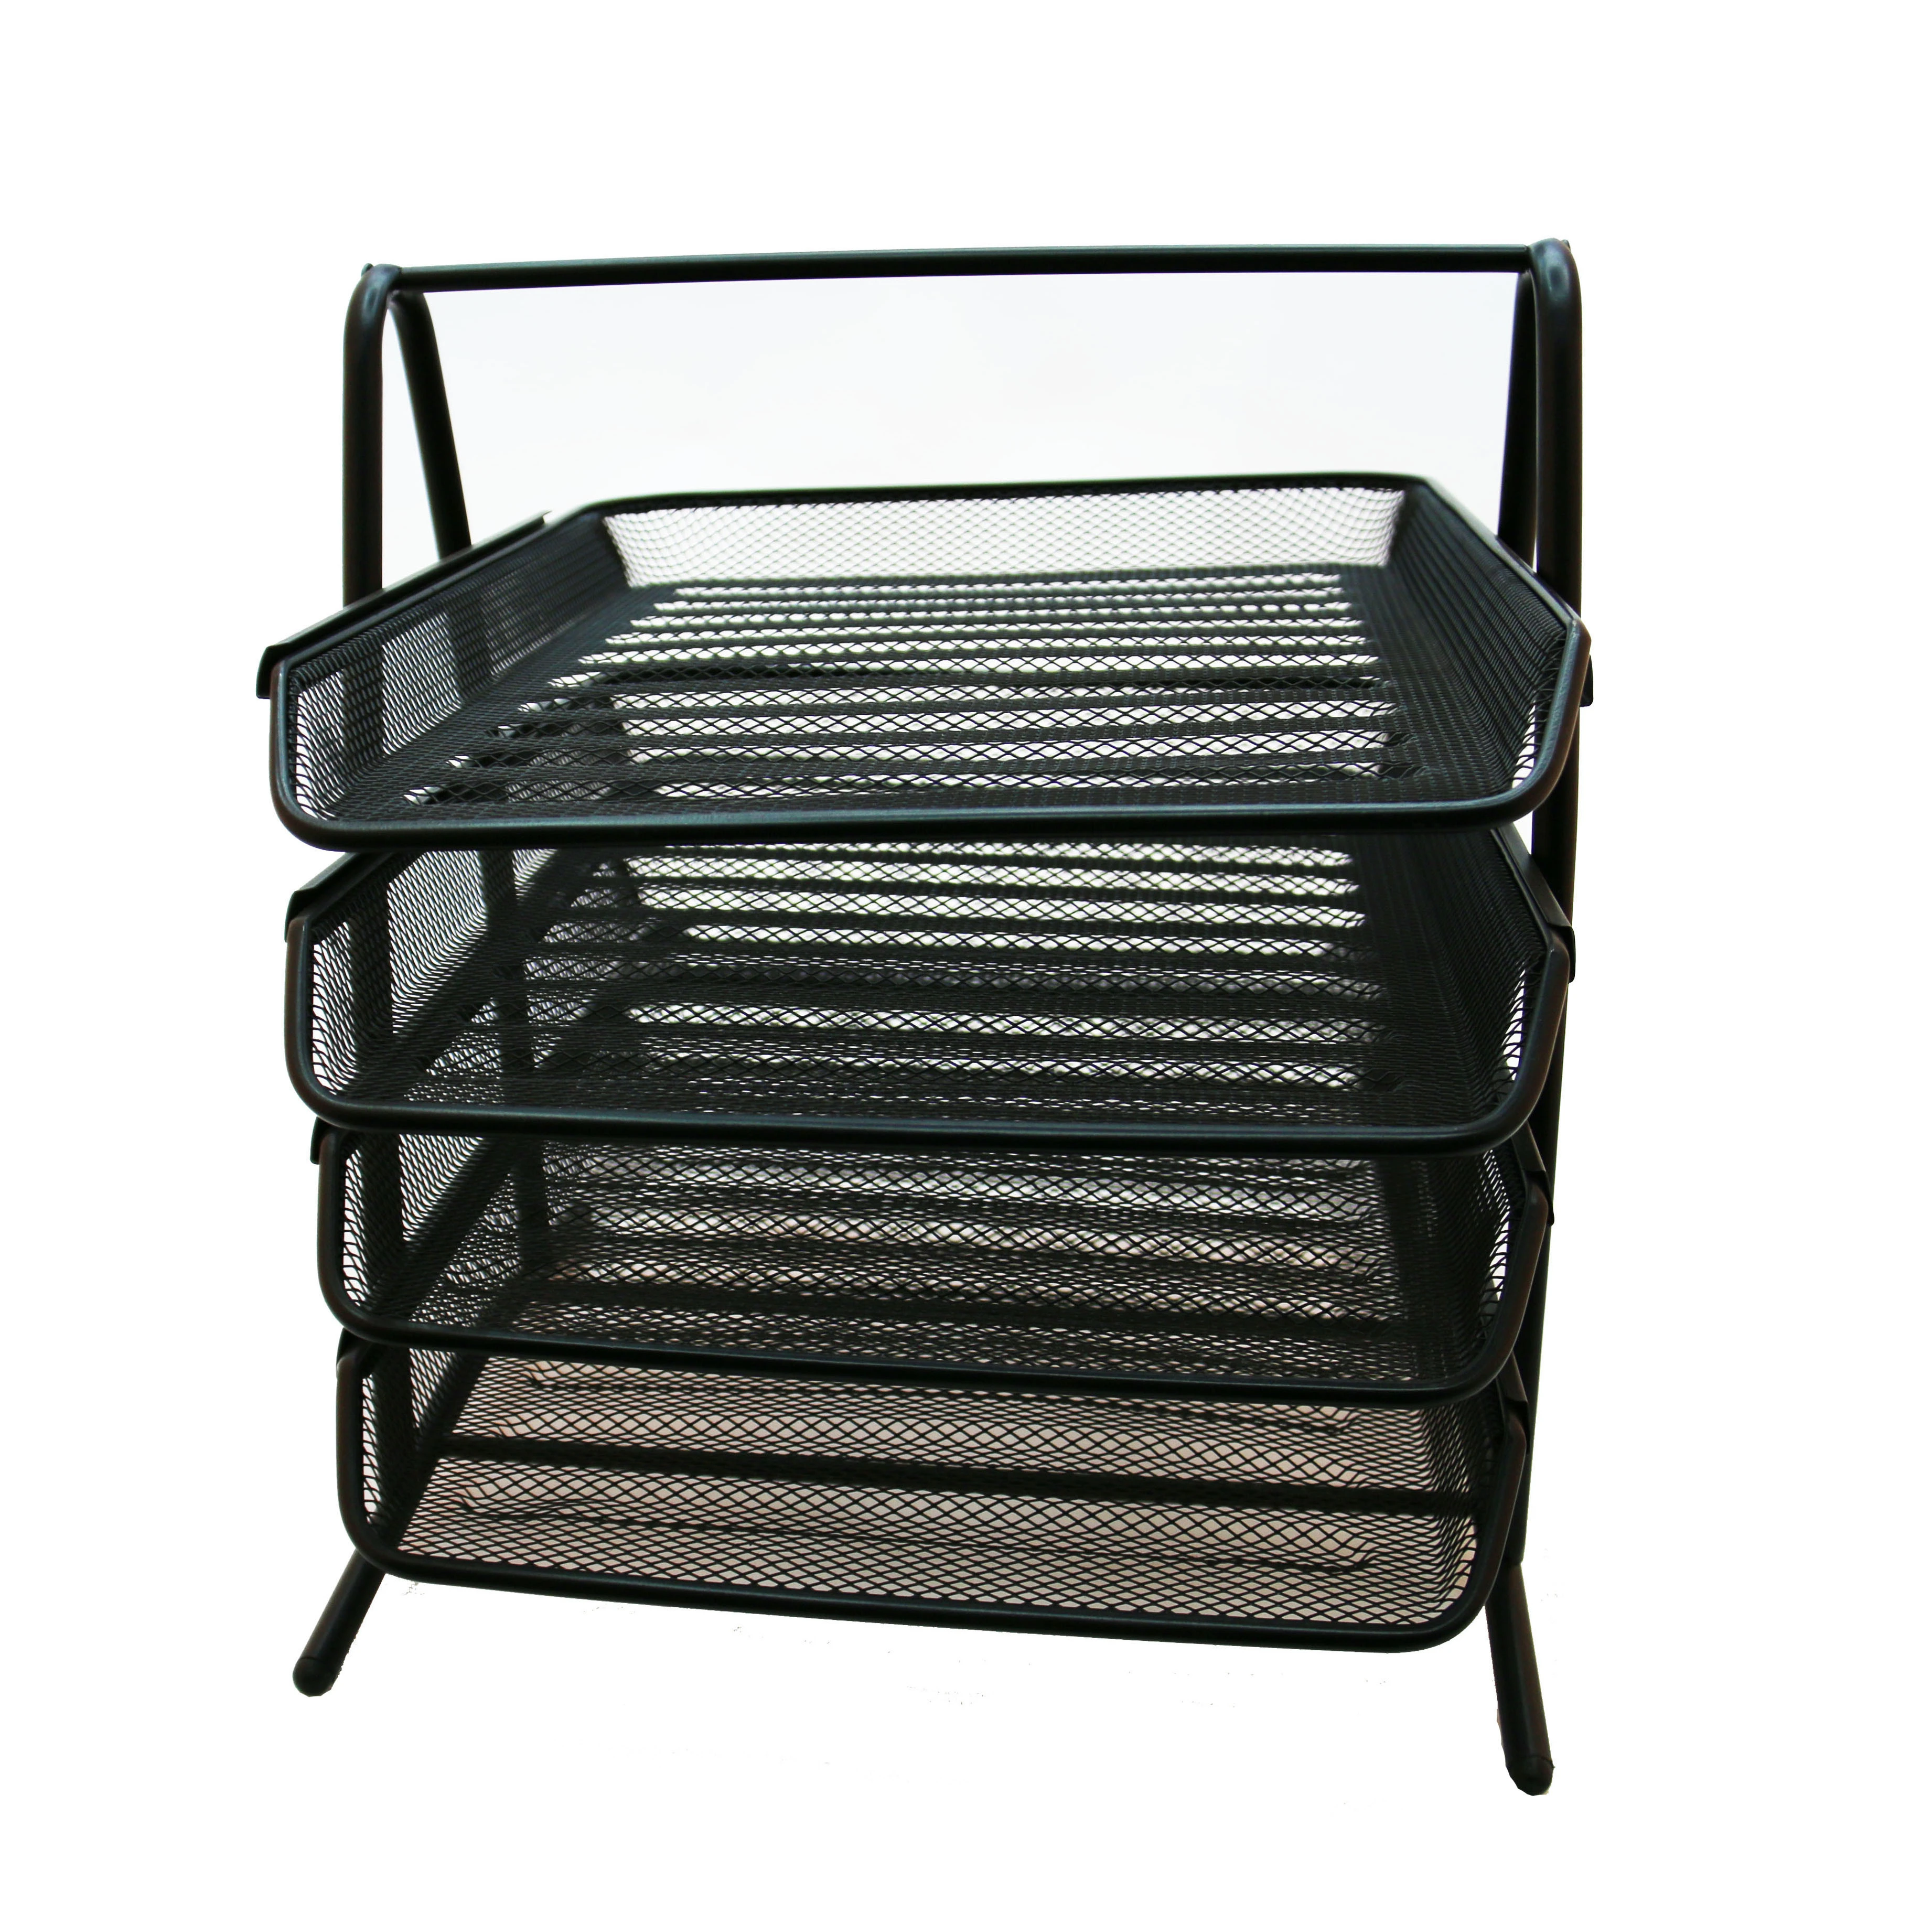 https://img2.tradewheel.com/uploads/images/products/0/3/4-tier-home-office-desk-organizer-a4-paper-document-file-tray-book-shelf-portable-metal-wire-mesh-storage-holder1-0994745001626819727.jpg.webp